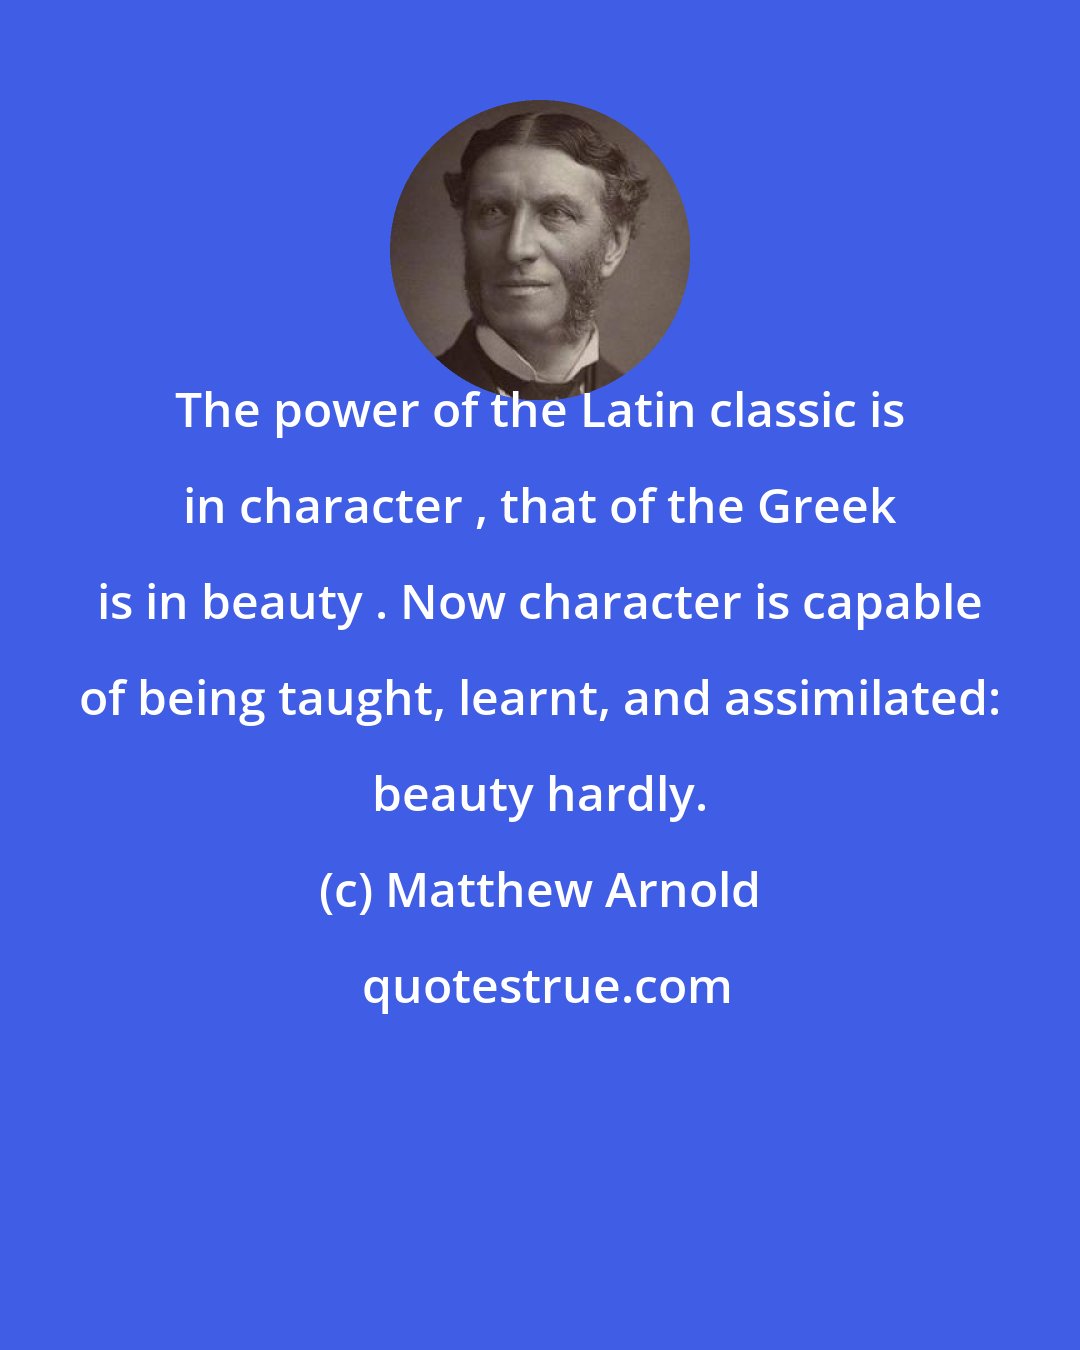 Matthew Arnold: The power of the Latin classic is in character , that of the Greek is in beauty . Now character is capable of being taught, learnt, and assimilated: beauty hardly.